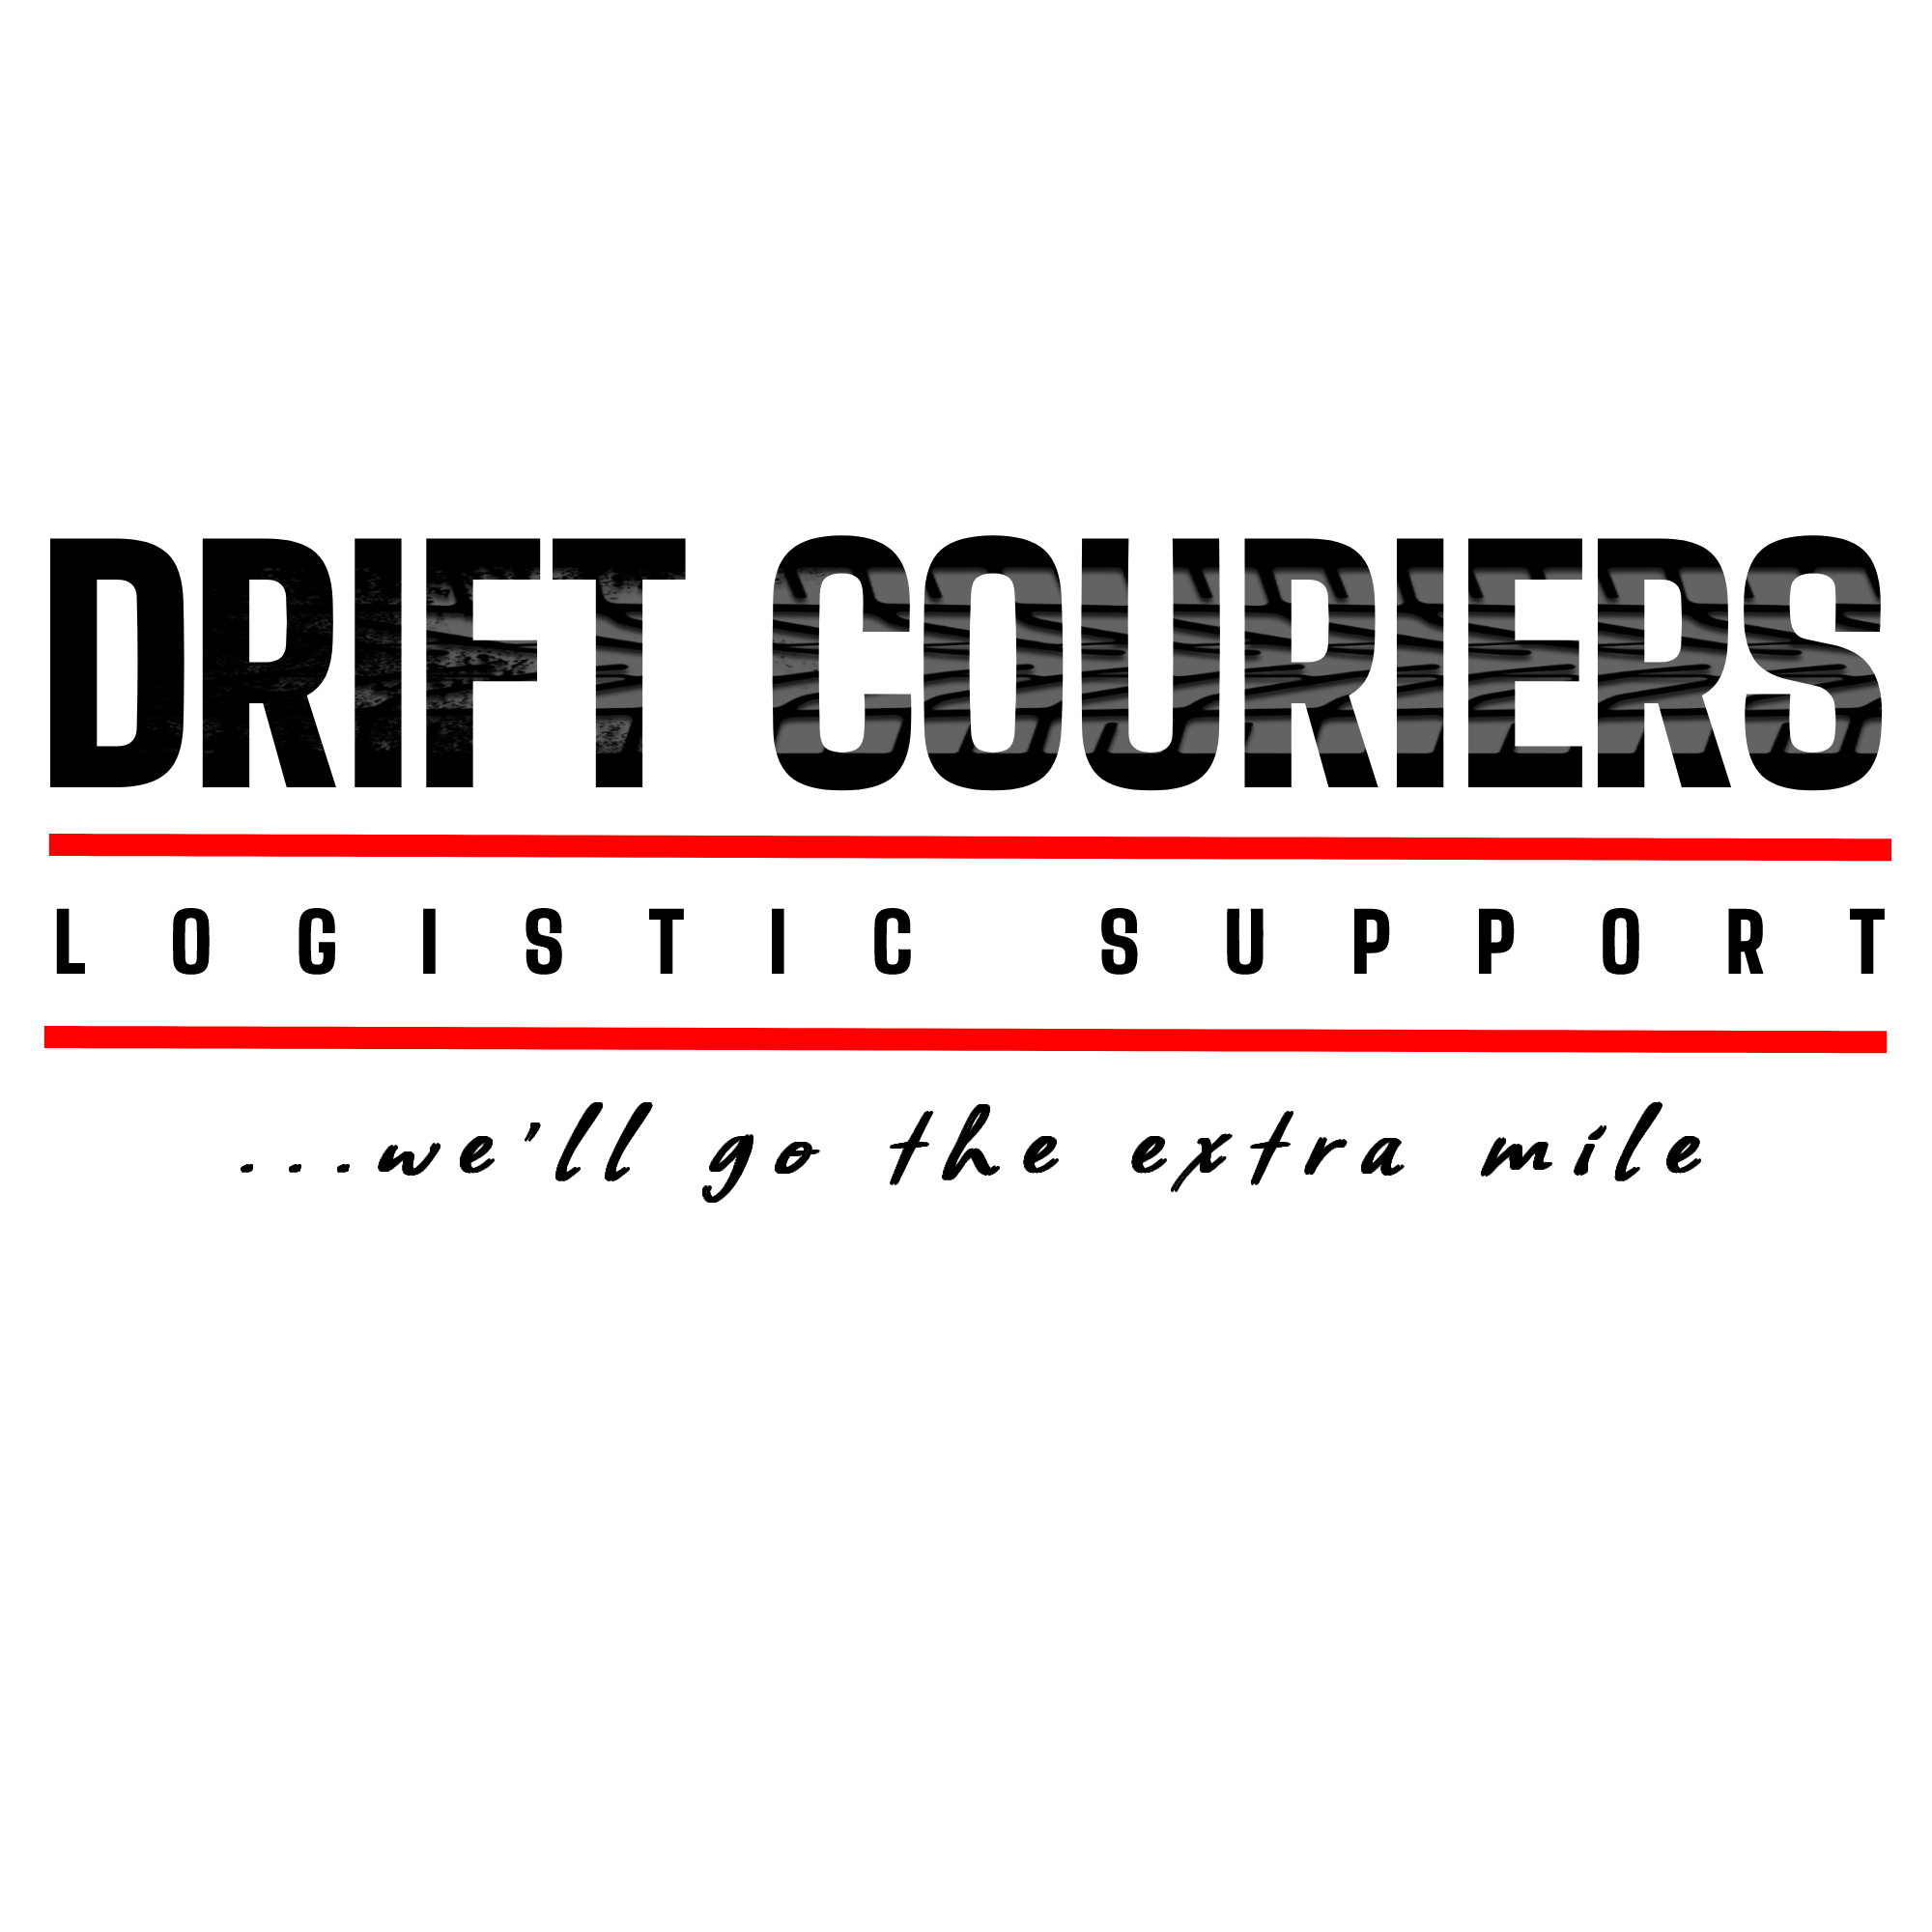 Logo of Drift Couriers